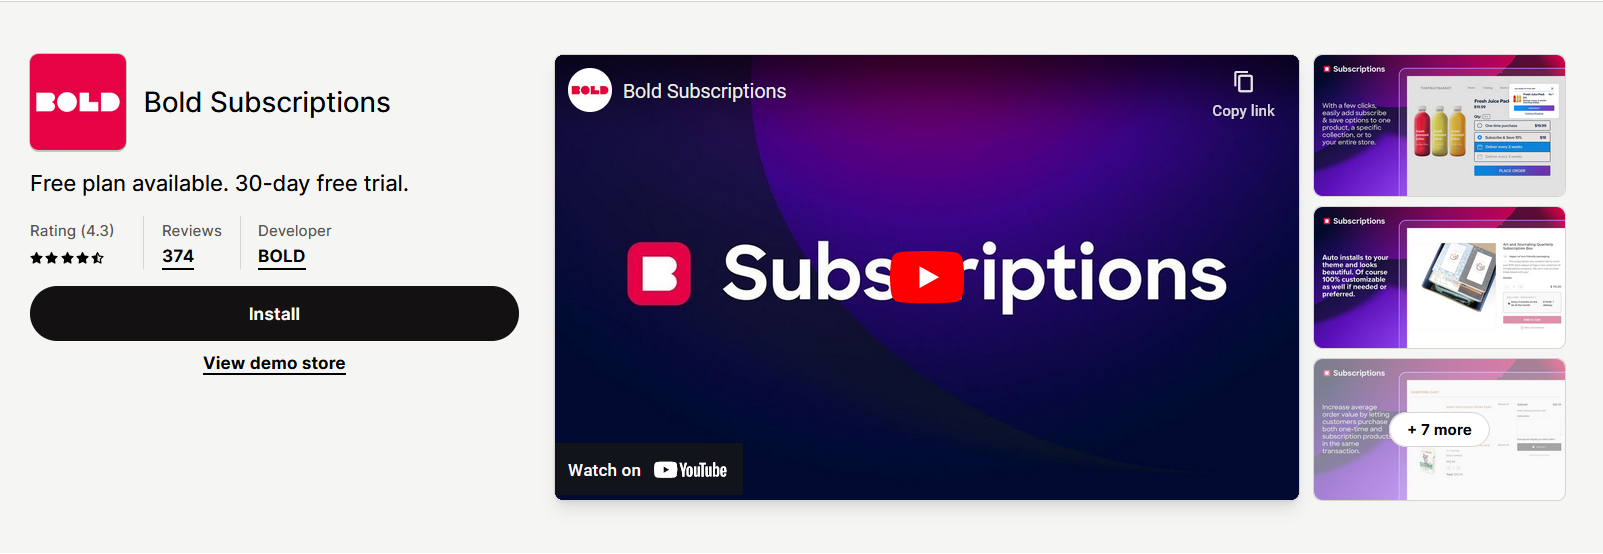 Bold subscriptions in Shopify apps store